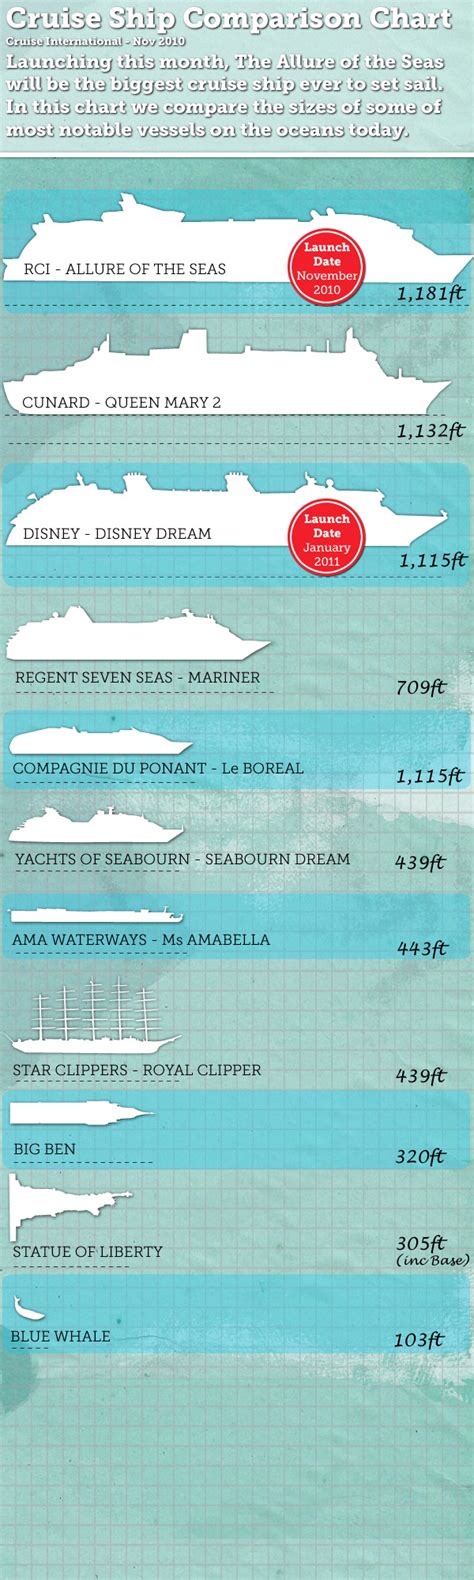 Not all river cruise lines have this option, so ask ahead of time. Cruise Ship Comparison Chart - Cruise International